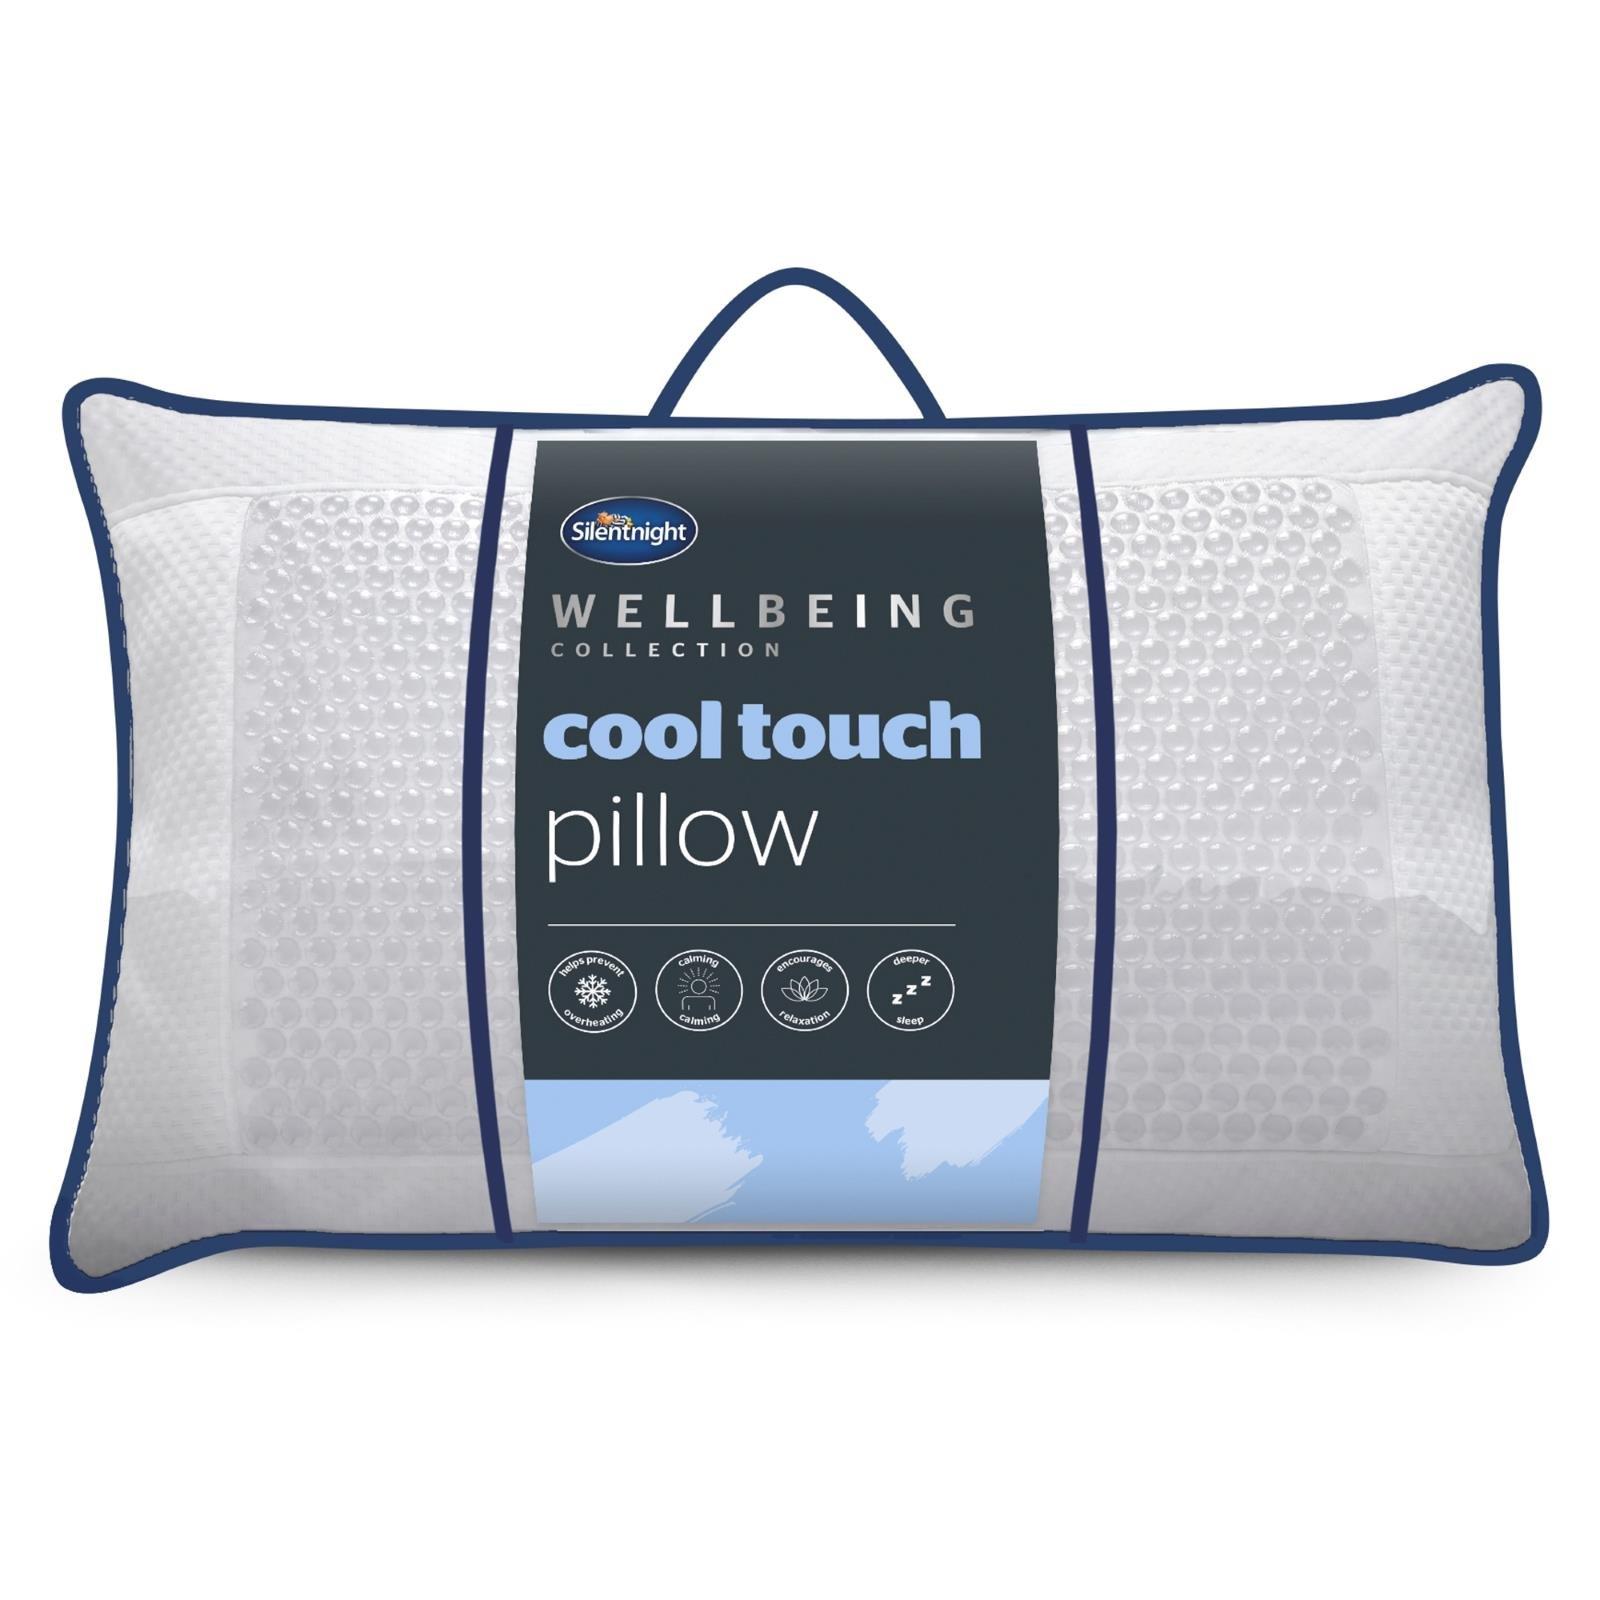 Pillow Cool Touch Wellbeing Filled Bounce Bed Fresh Cooling Summer